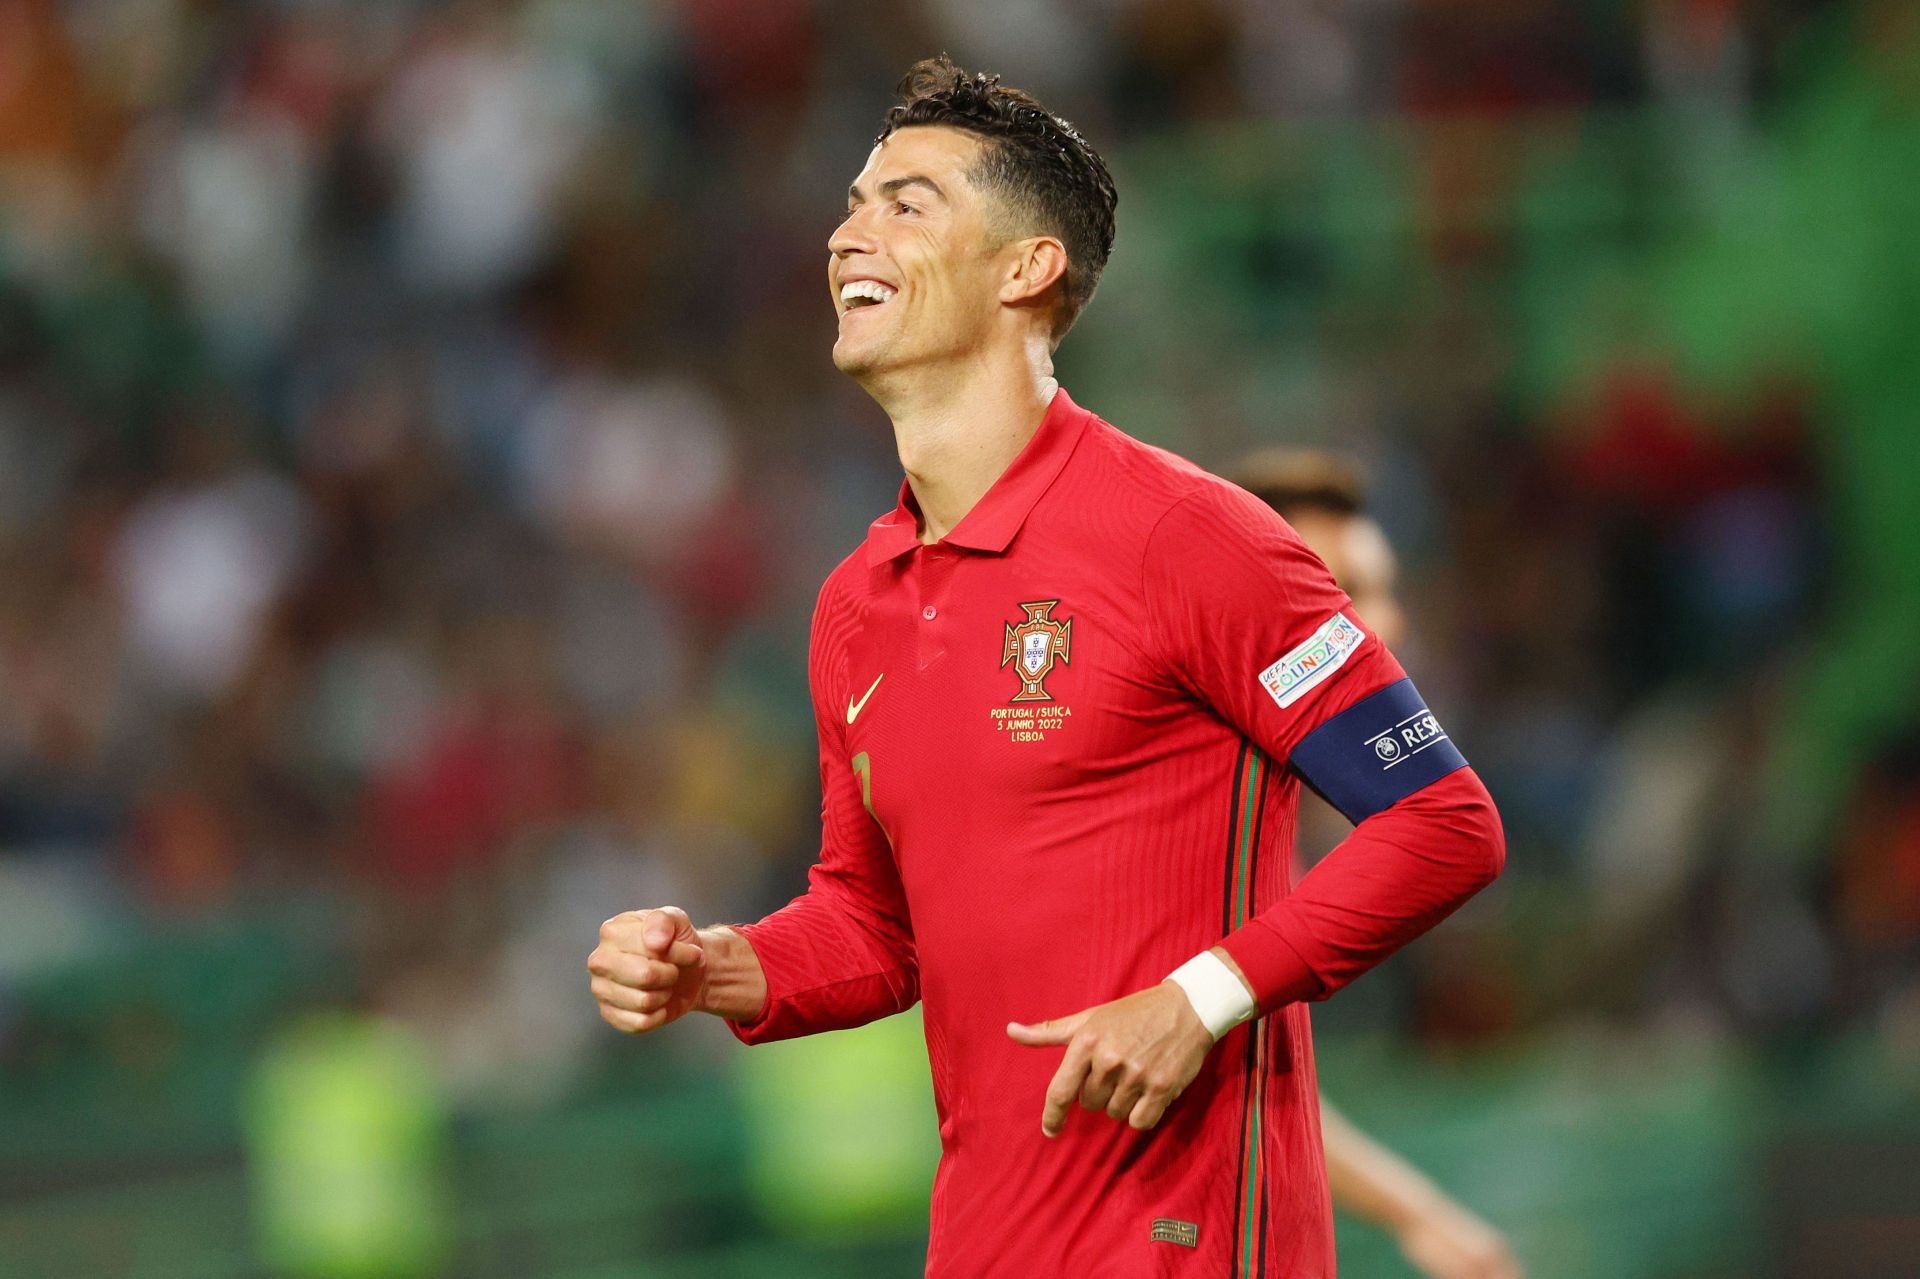 Cristiano Ronaldo scored twice last time around. (Photo by Carlos Rodrigues/Getty Images)